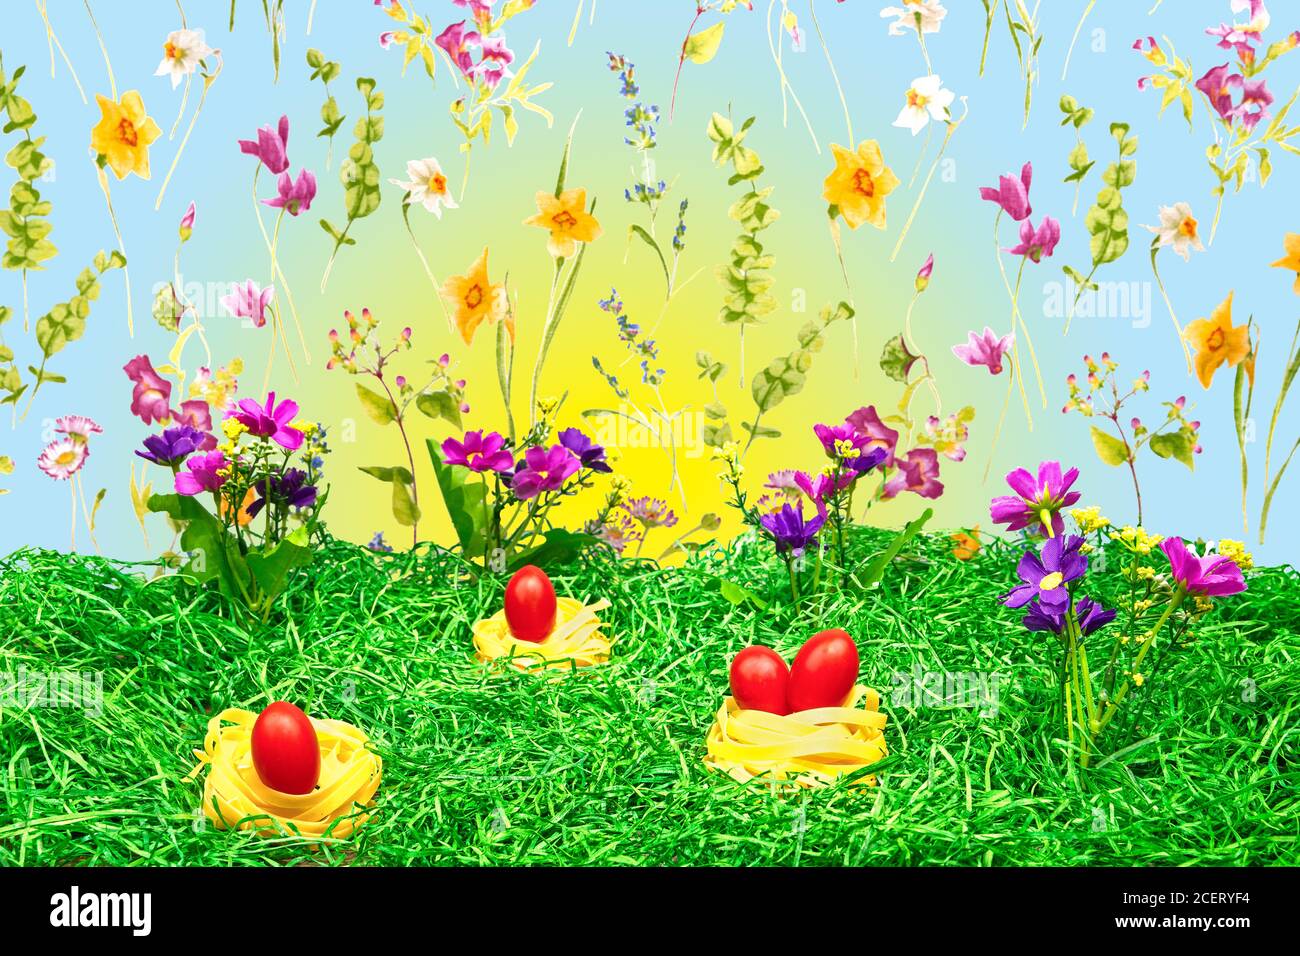 Roma tomatoes as easter eggs in noodle nests among green excelsior easter grass. With colorful spring flowers, blue sky and a sunrise. Stock Photo